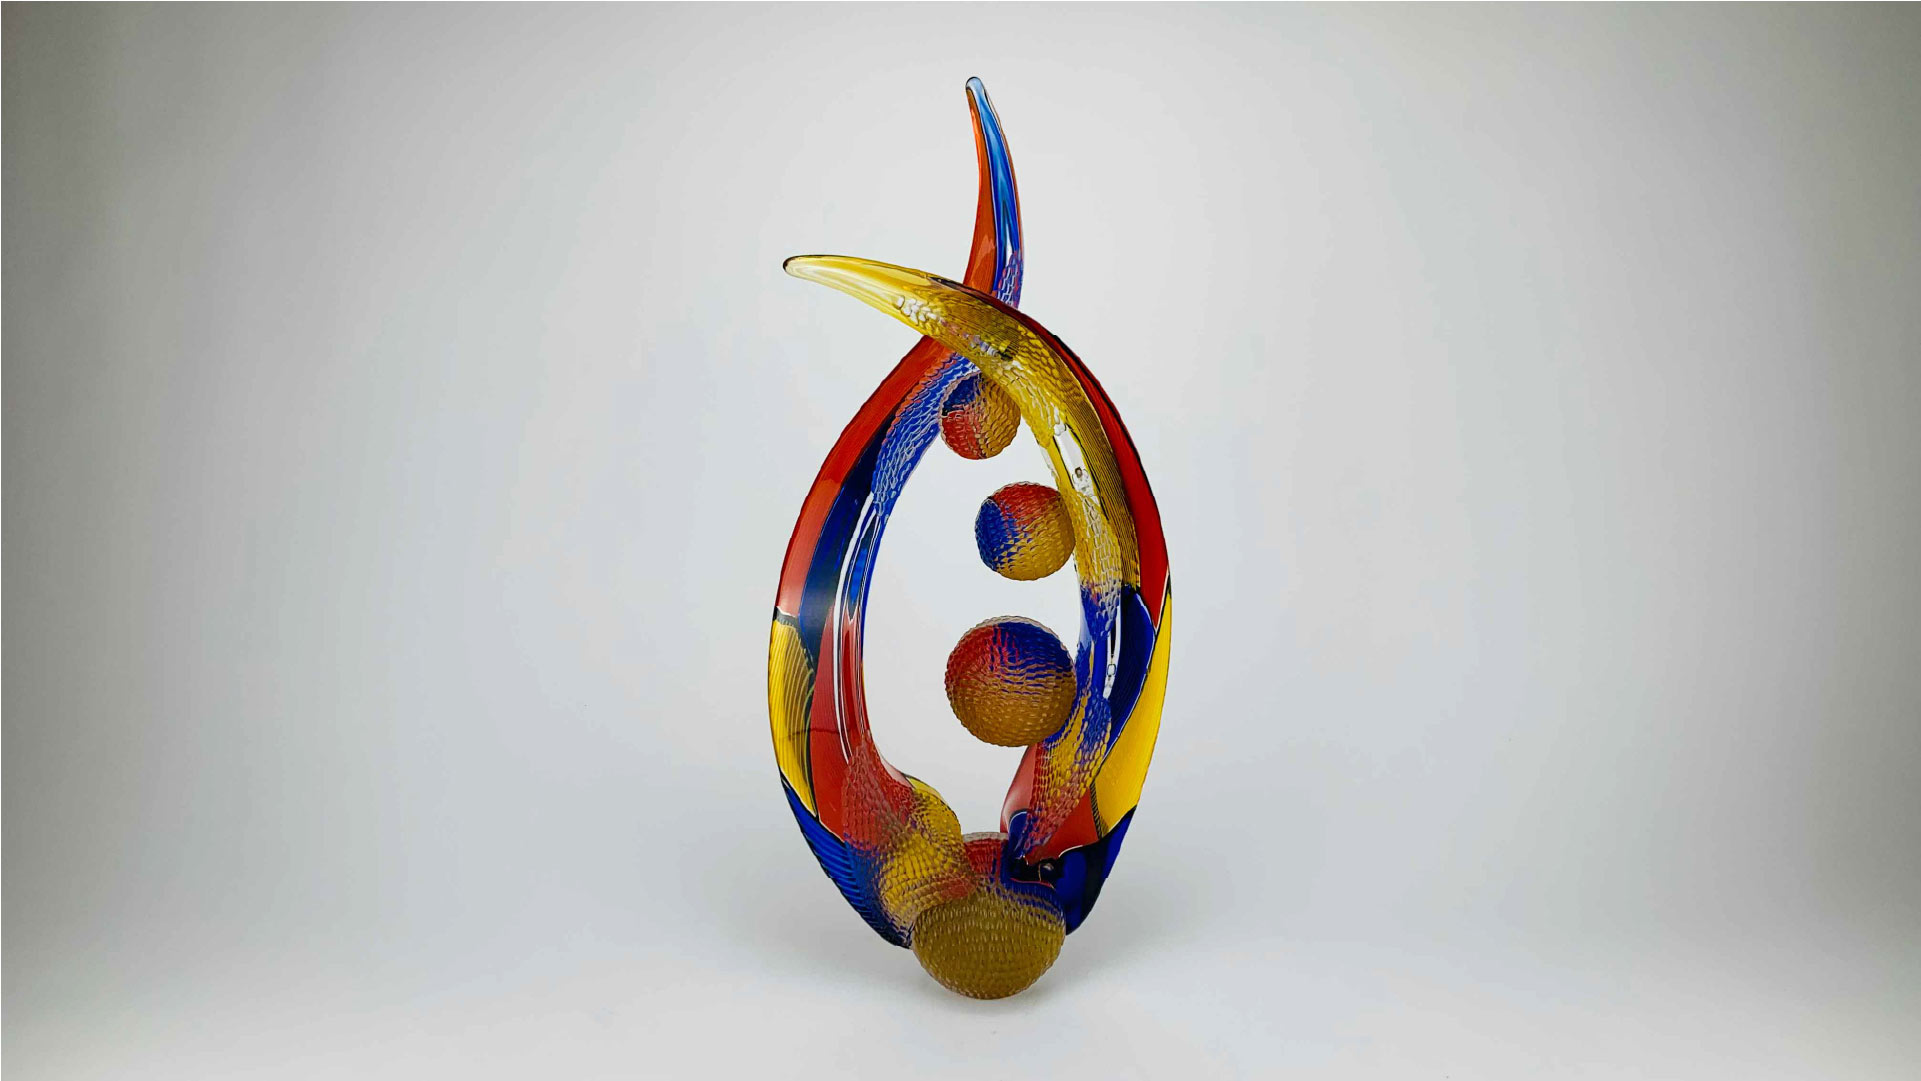 richard-royal-apropo-series-Cry-Love-A20-09-yellow-blue-red-primary-colors-solid-glass-sculpture